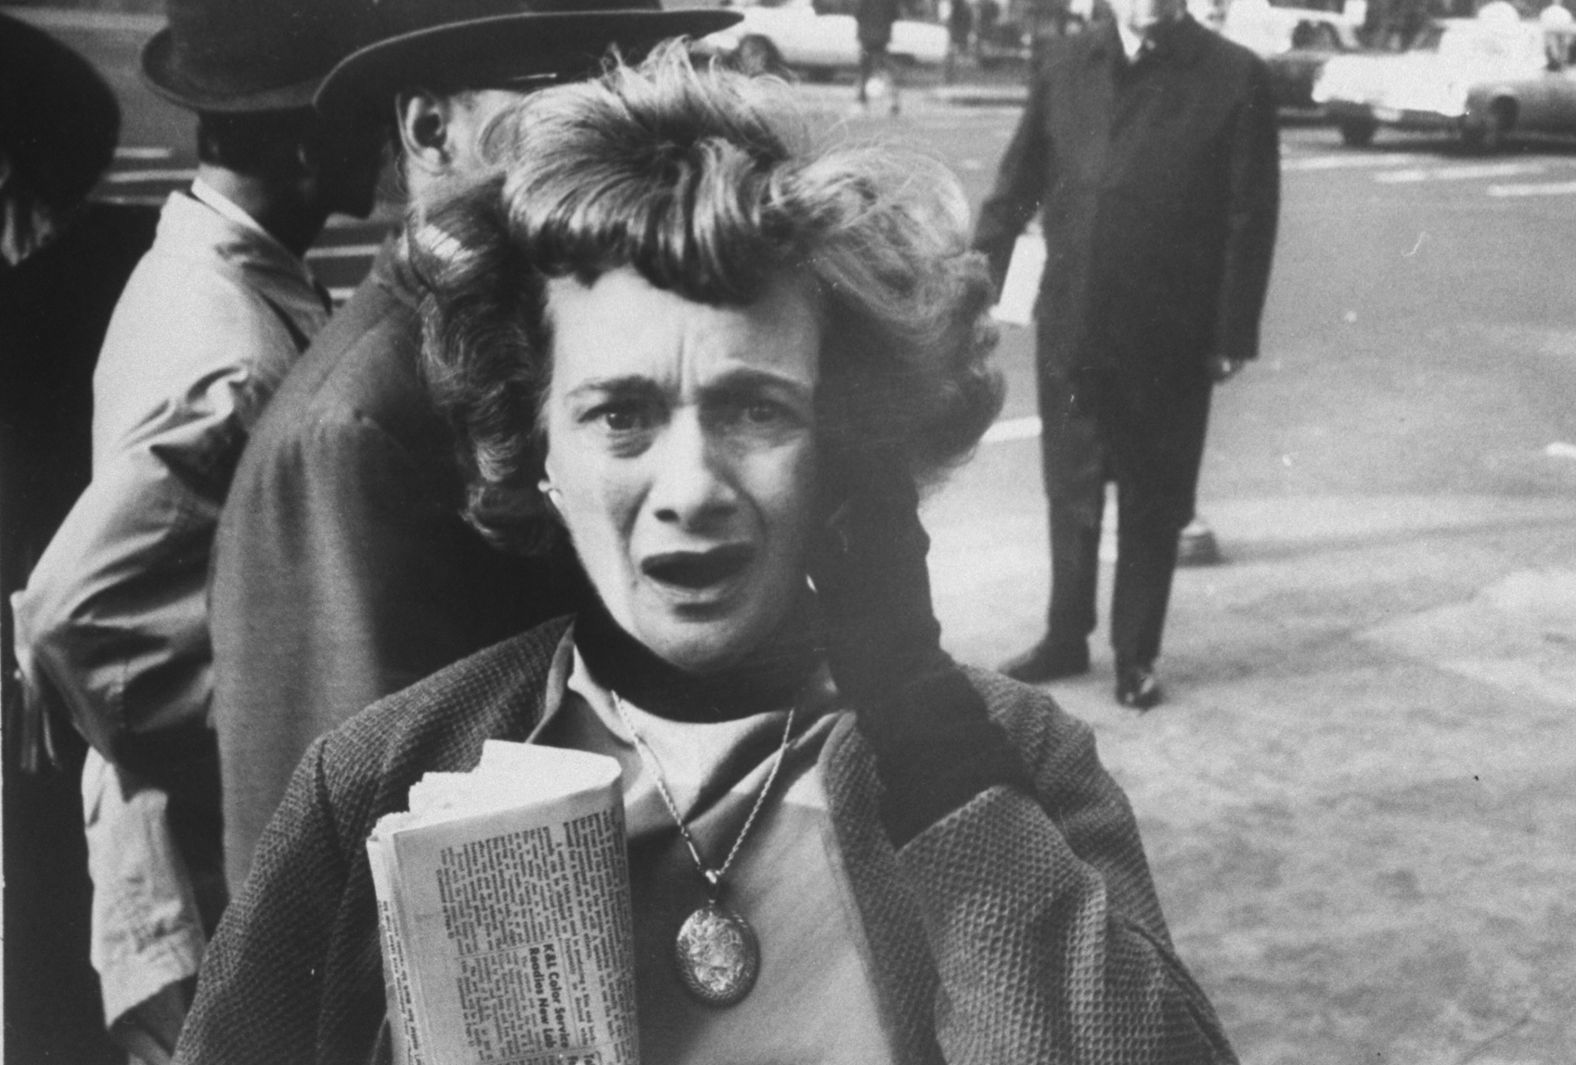 A photographer captured this New Yorker's expression of shock upon hearing the news of Kennedy's death. He was 46.